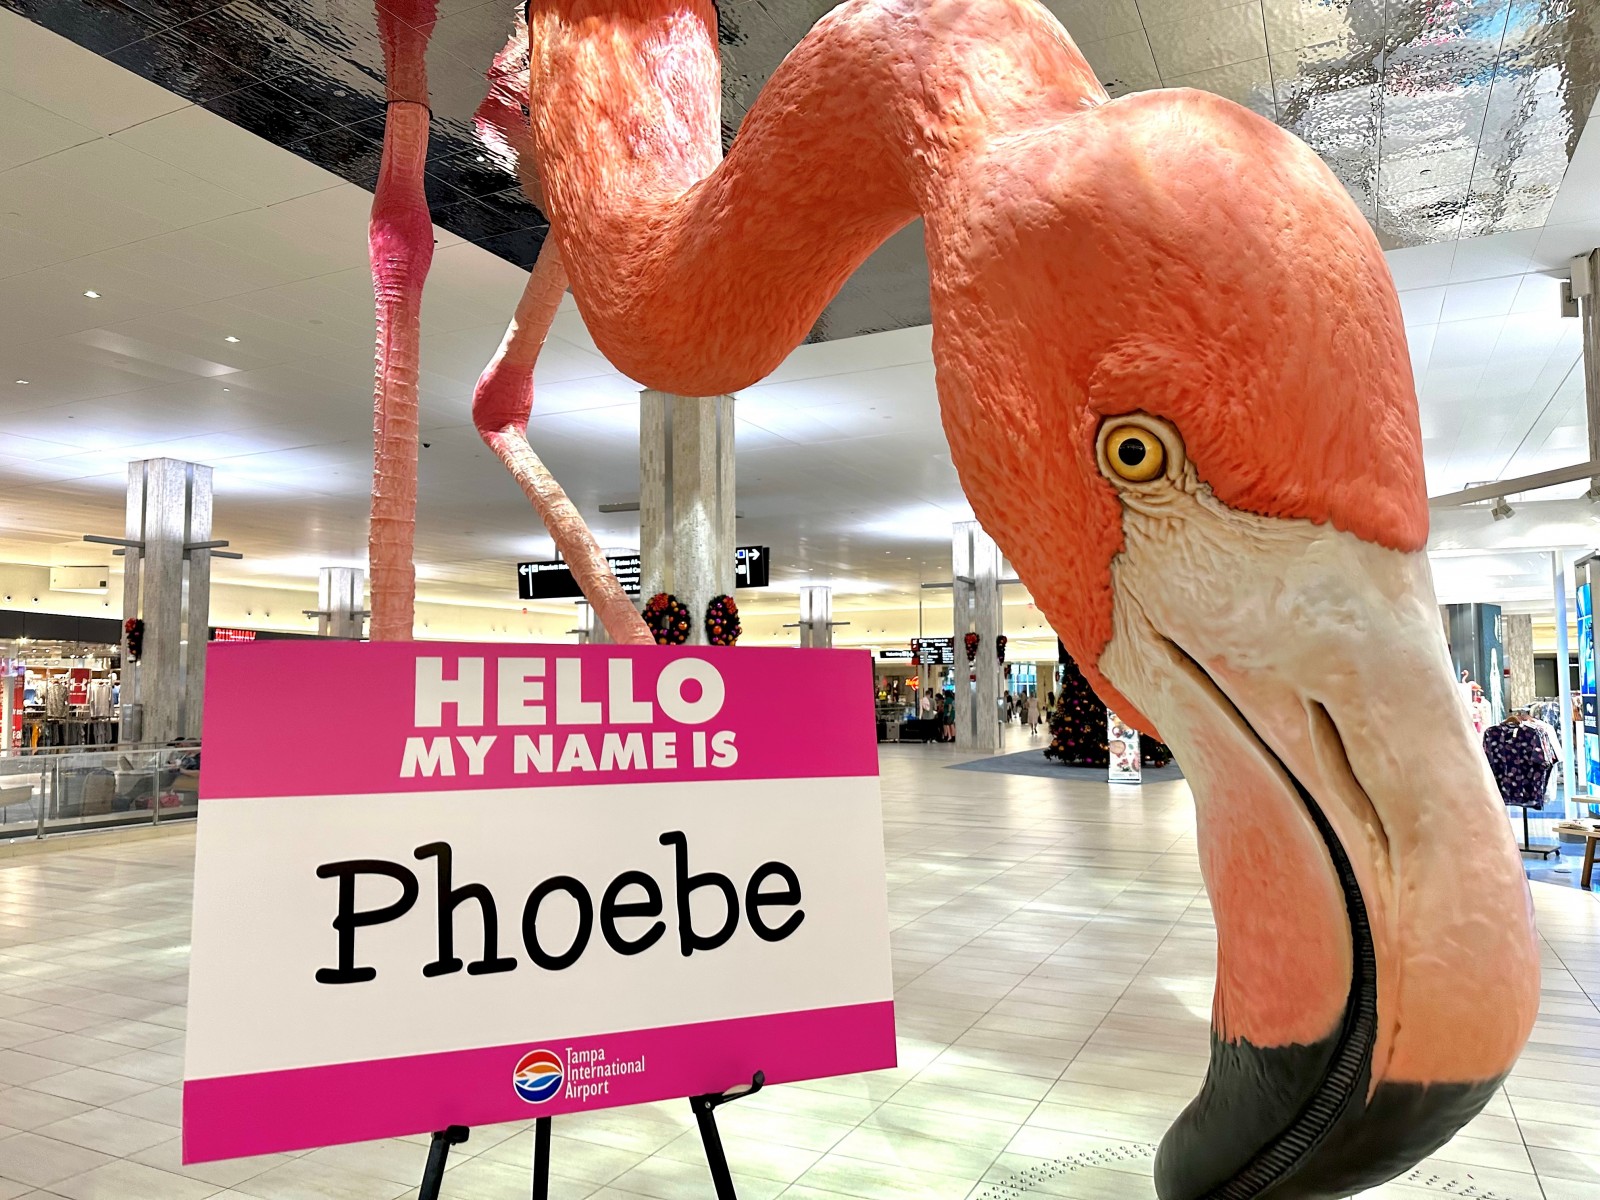  The votes are in and it's official: “Phoebe” wins TPA's Name the Flamingo Contest 